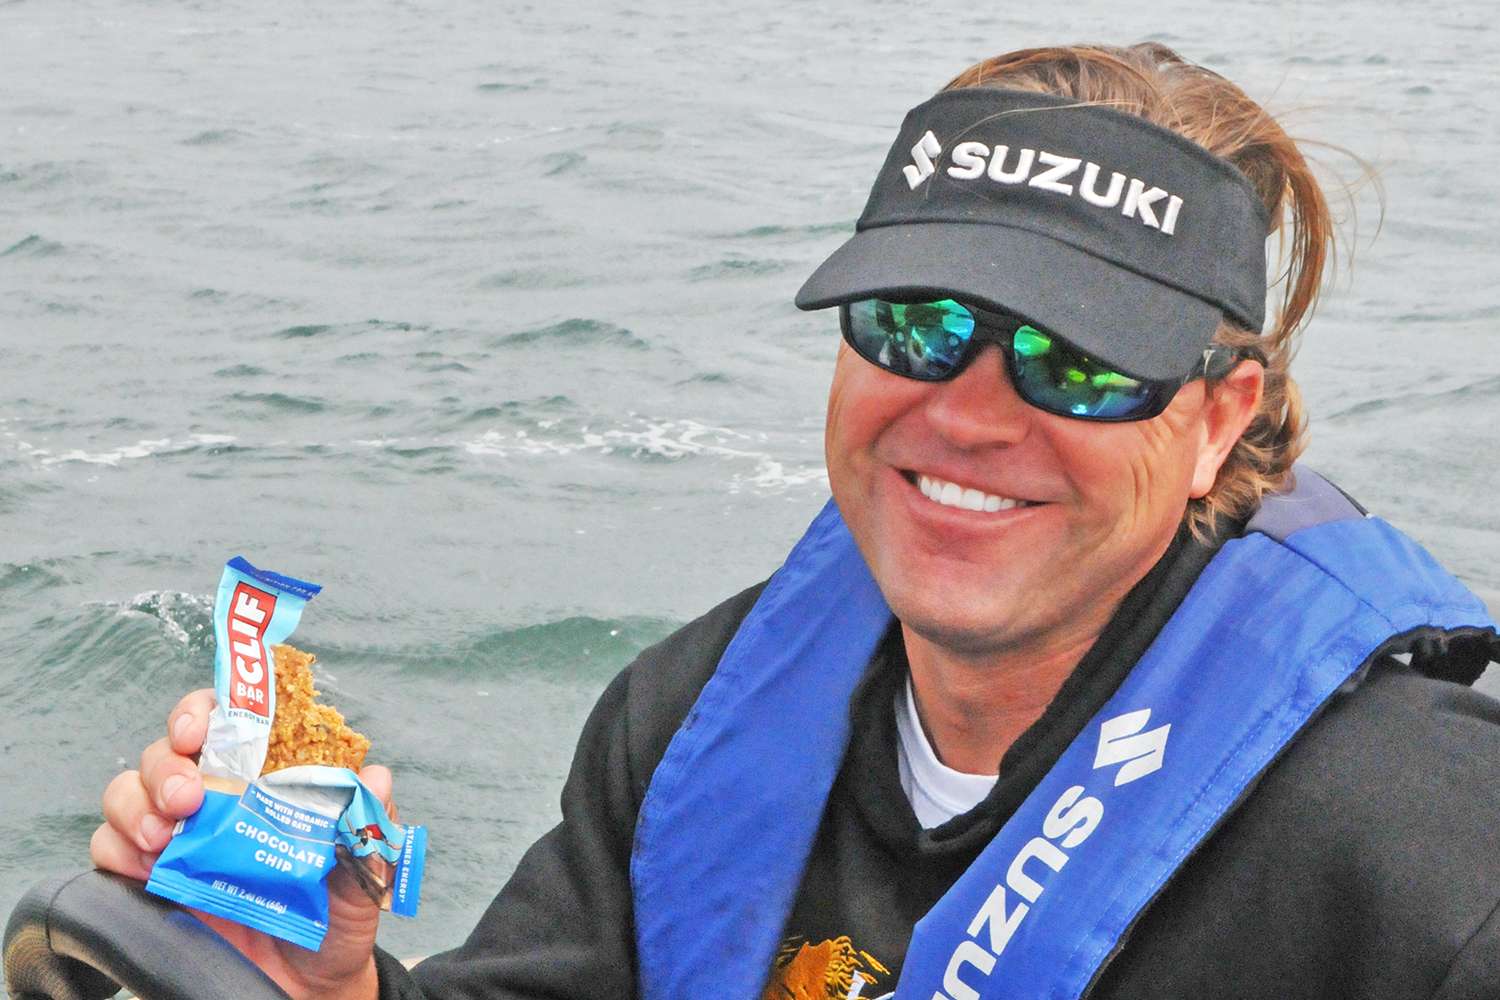 Cliff Pirch's favorite pick-me-up is a Clif Bar, naturally. Asked if it was his signature series energy bar, he said, 